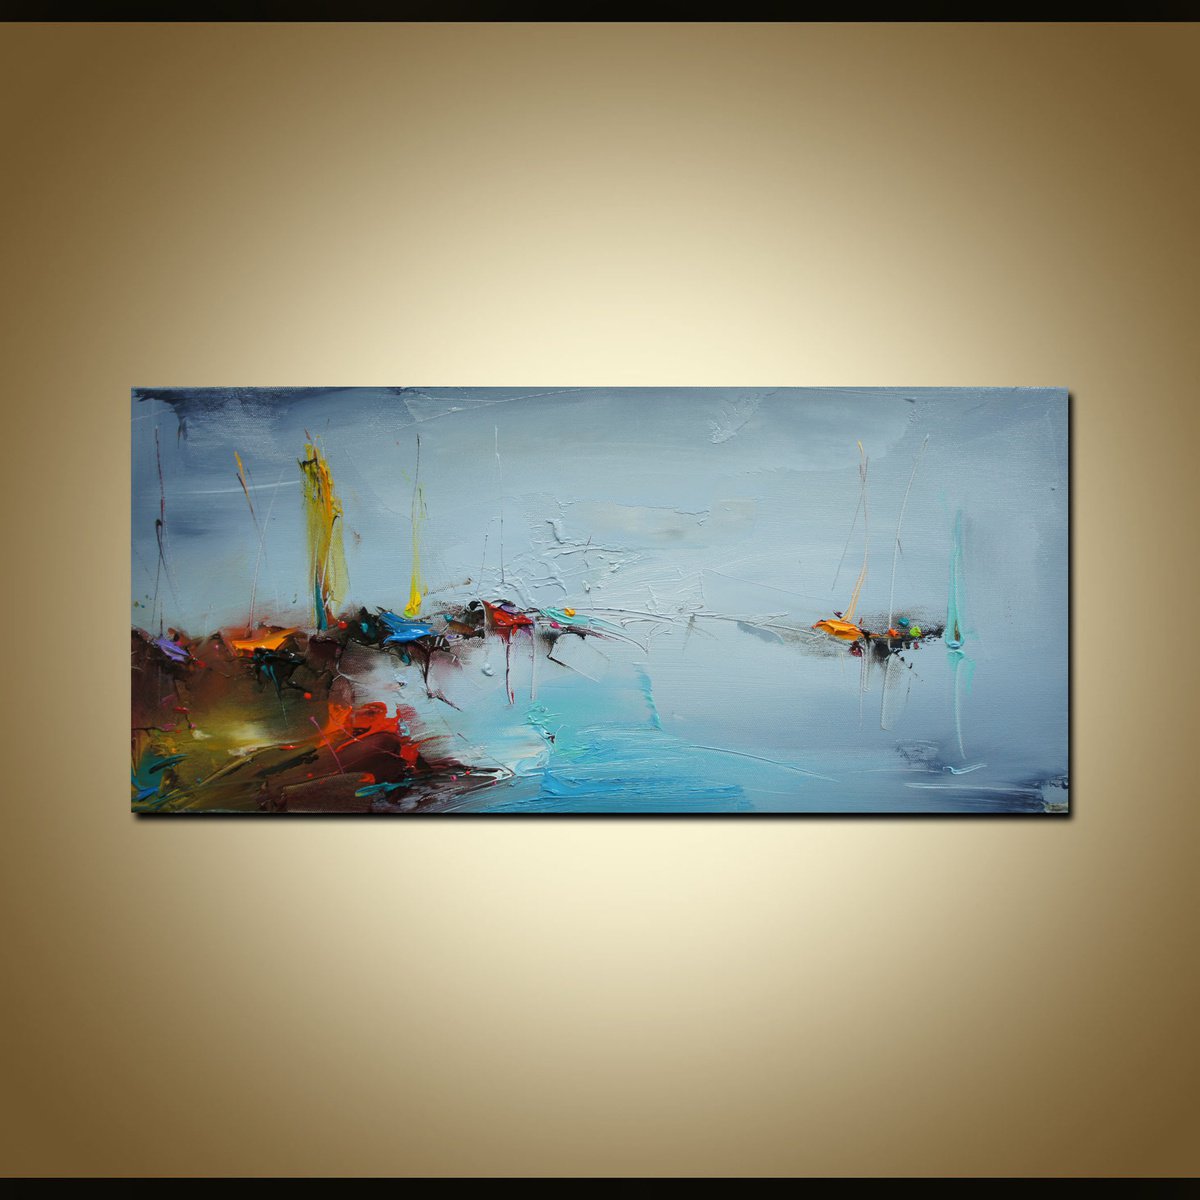 Seaside, Abstract Oil Painting on Canvas by Stanislav Lazarov